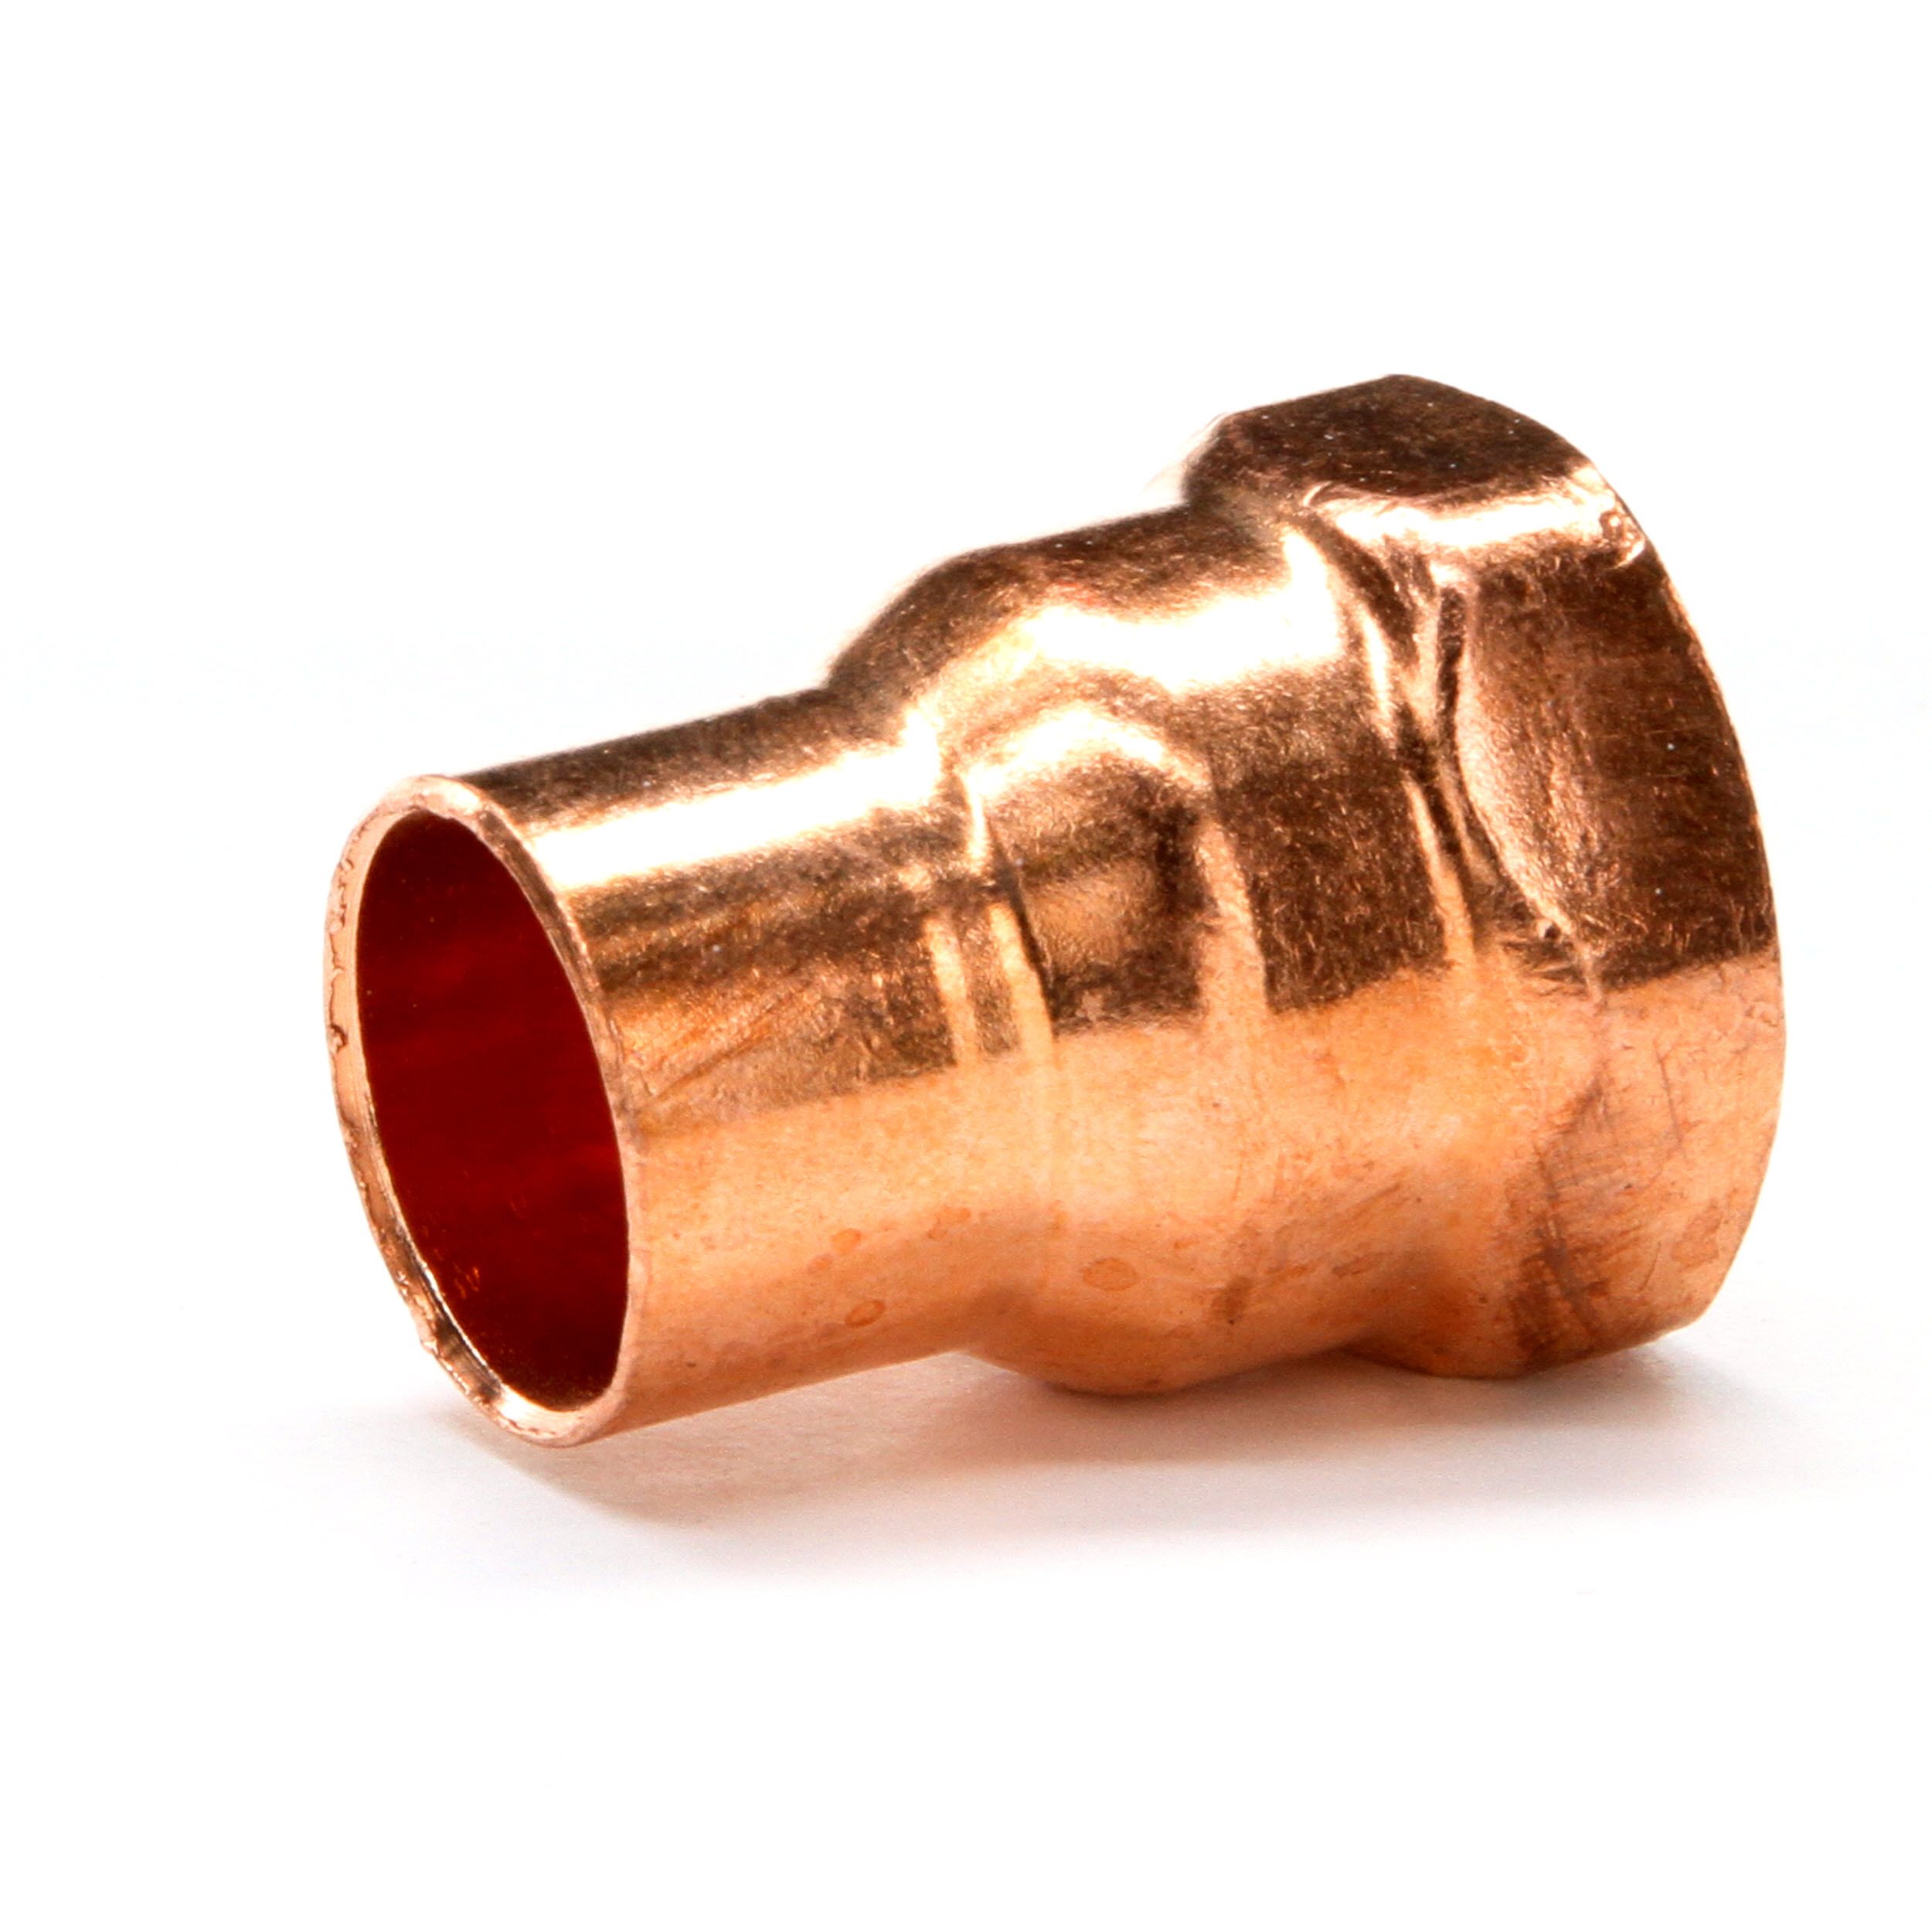 50 x Copper End Feed Reducer 22mm x 15mm M x F Fitting Plumbing Joining Pipe 